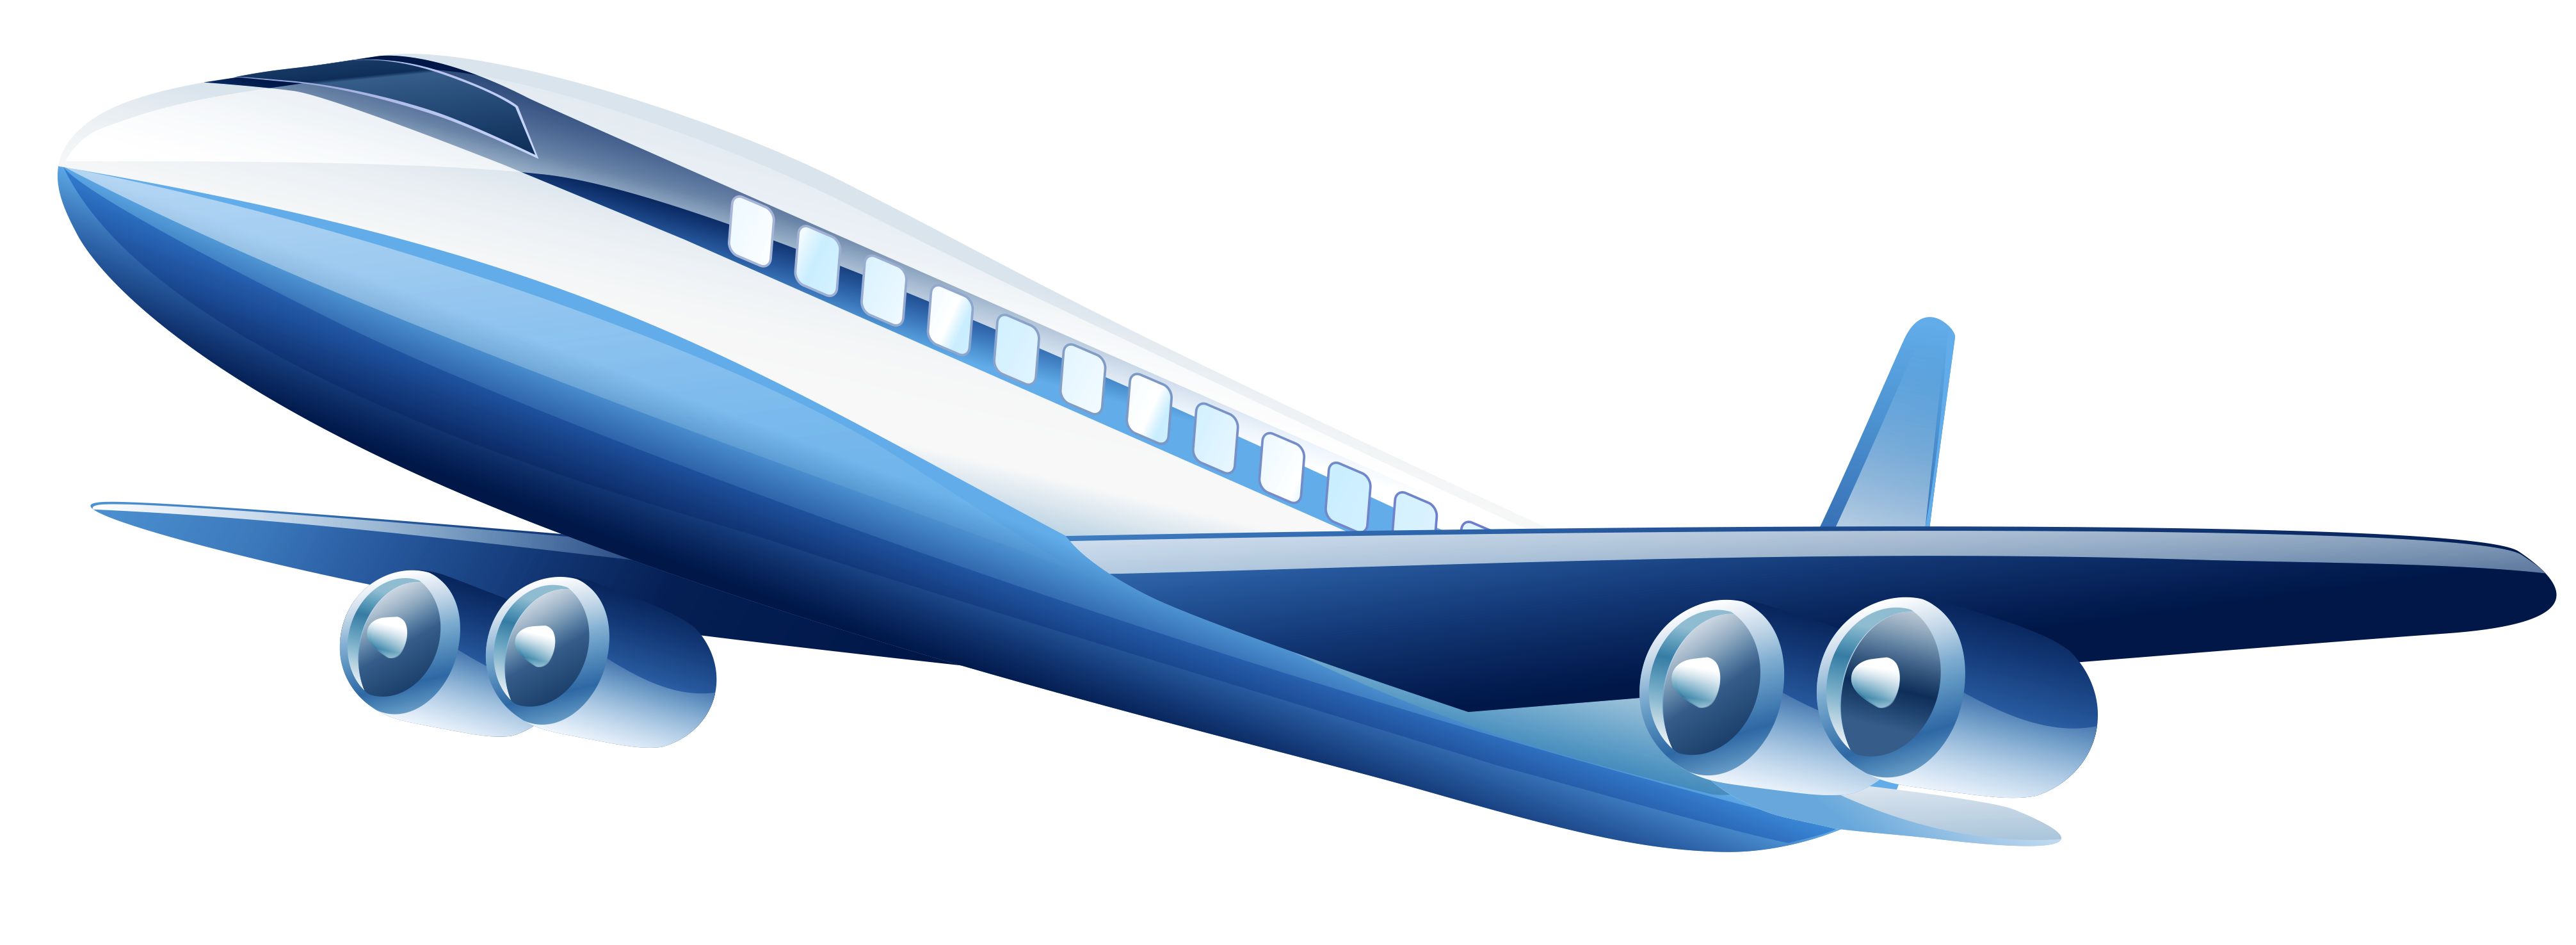 Airplane_Clipart.png?m=1433777009.